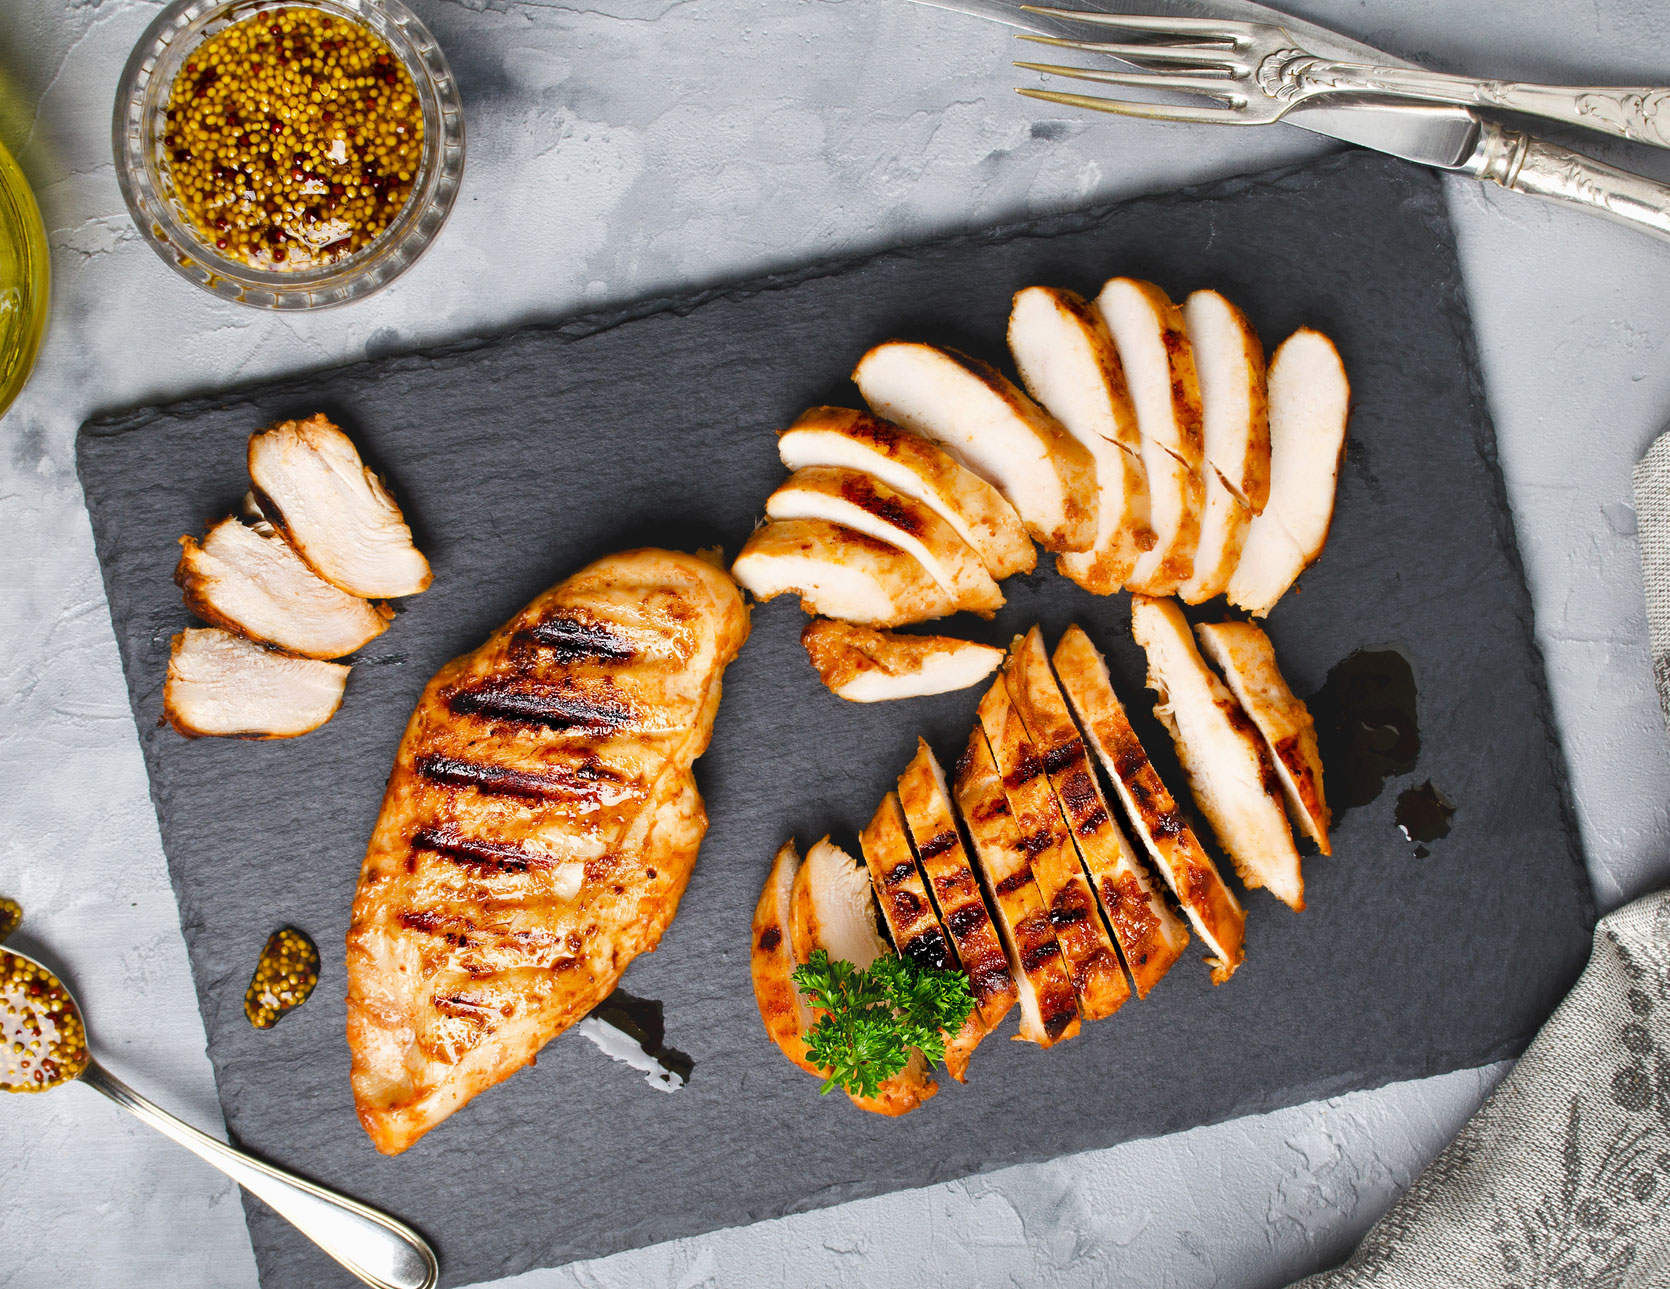 A piece of grilled chicken sliced into pieces on a cutting board.